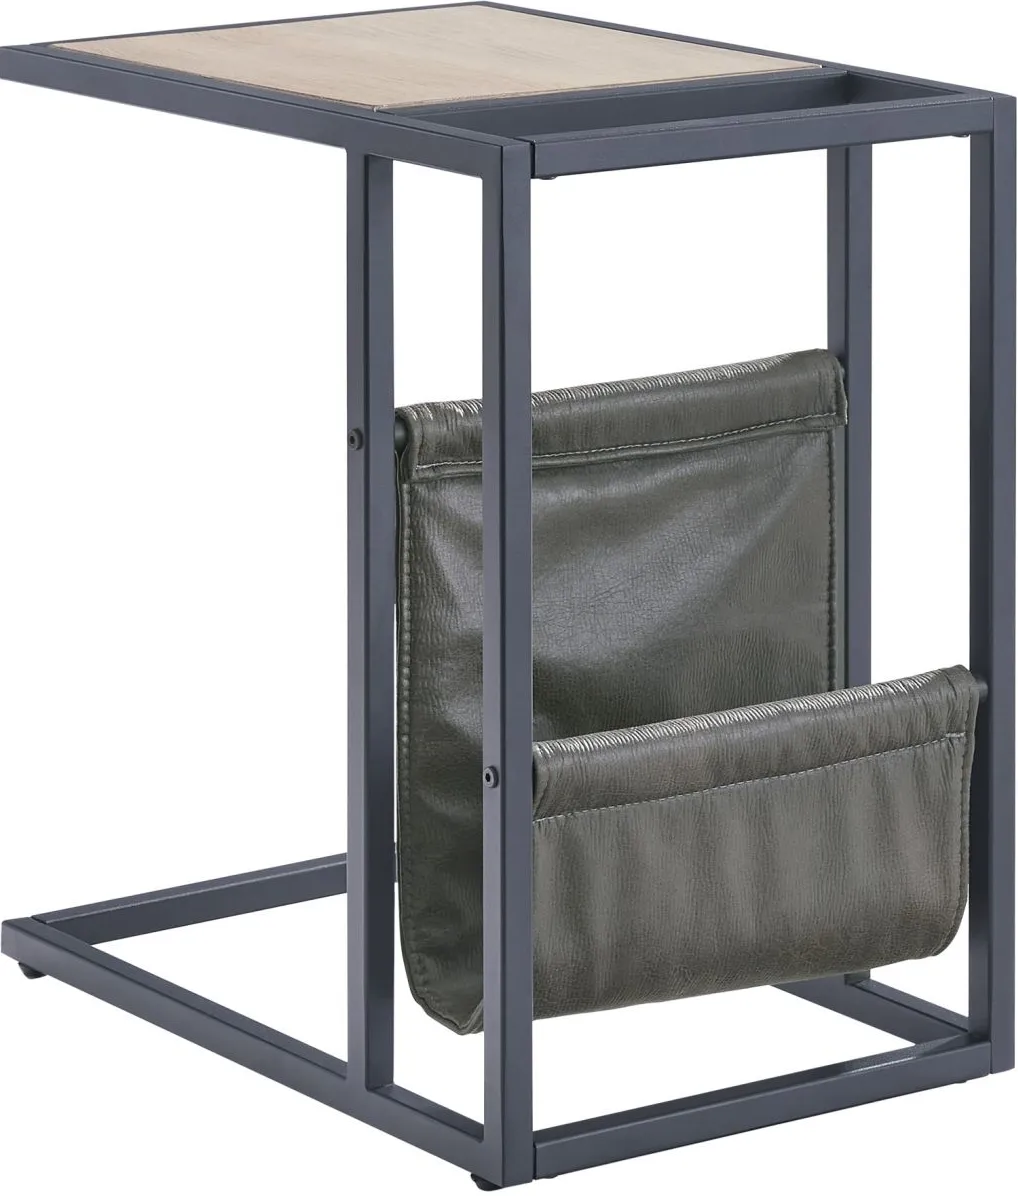 Signature Design by Ashley® Freslowe Light Brown/Black Chairside End Table